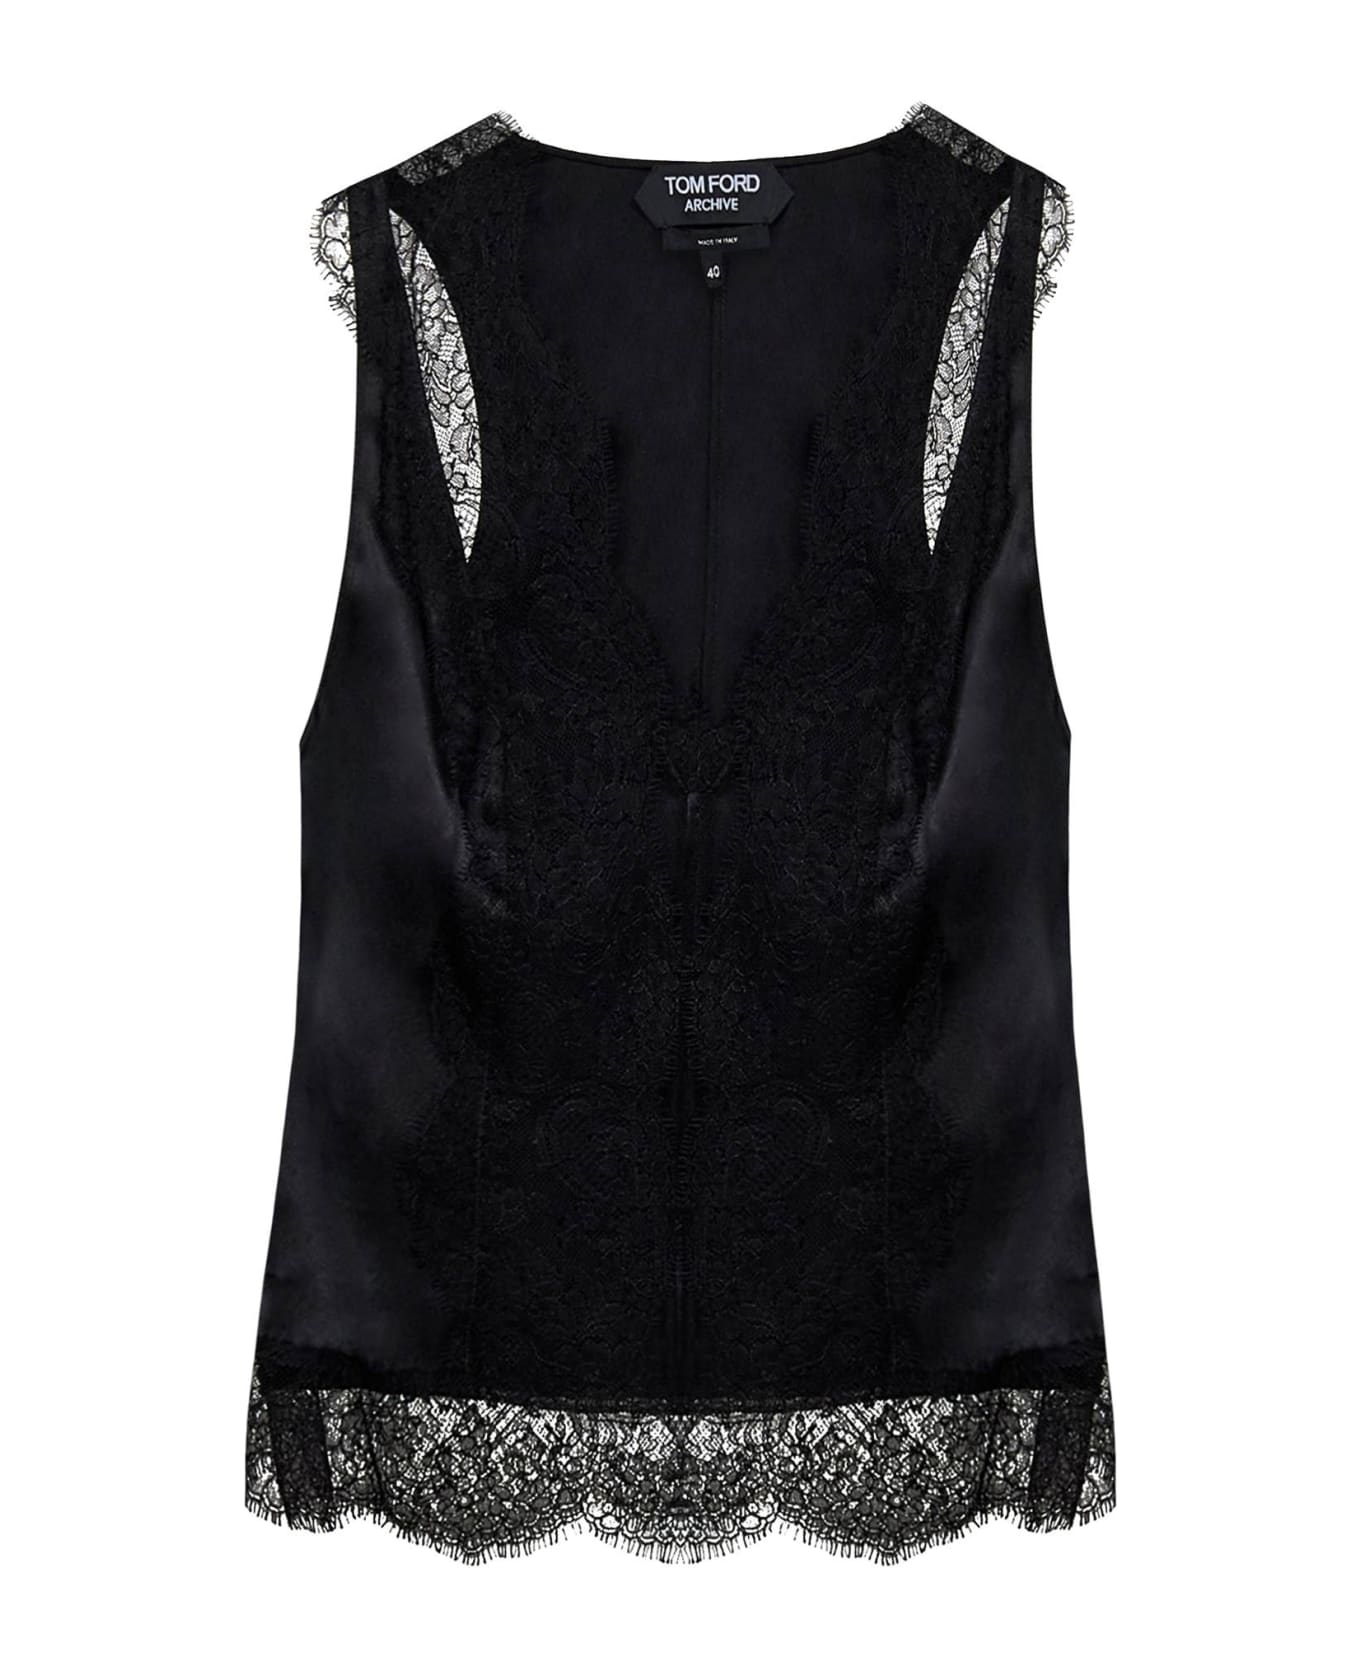 Tom Ford Satin Tank Top With Chantilly Lace - BLACK (Black) トップス